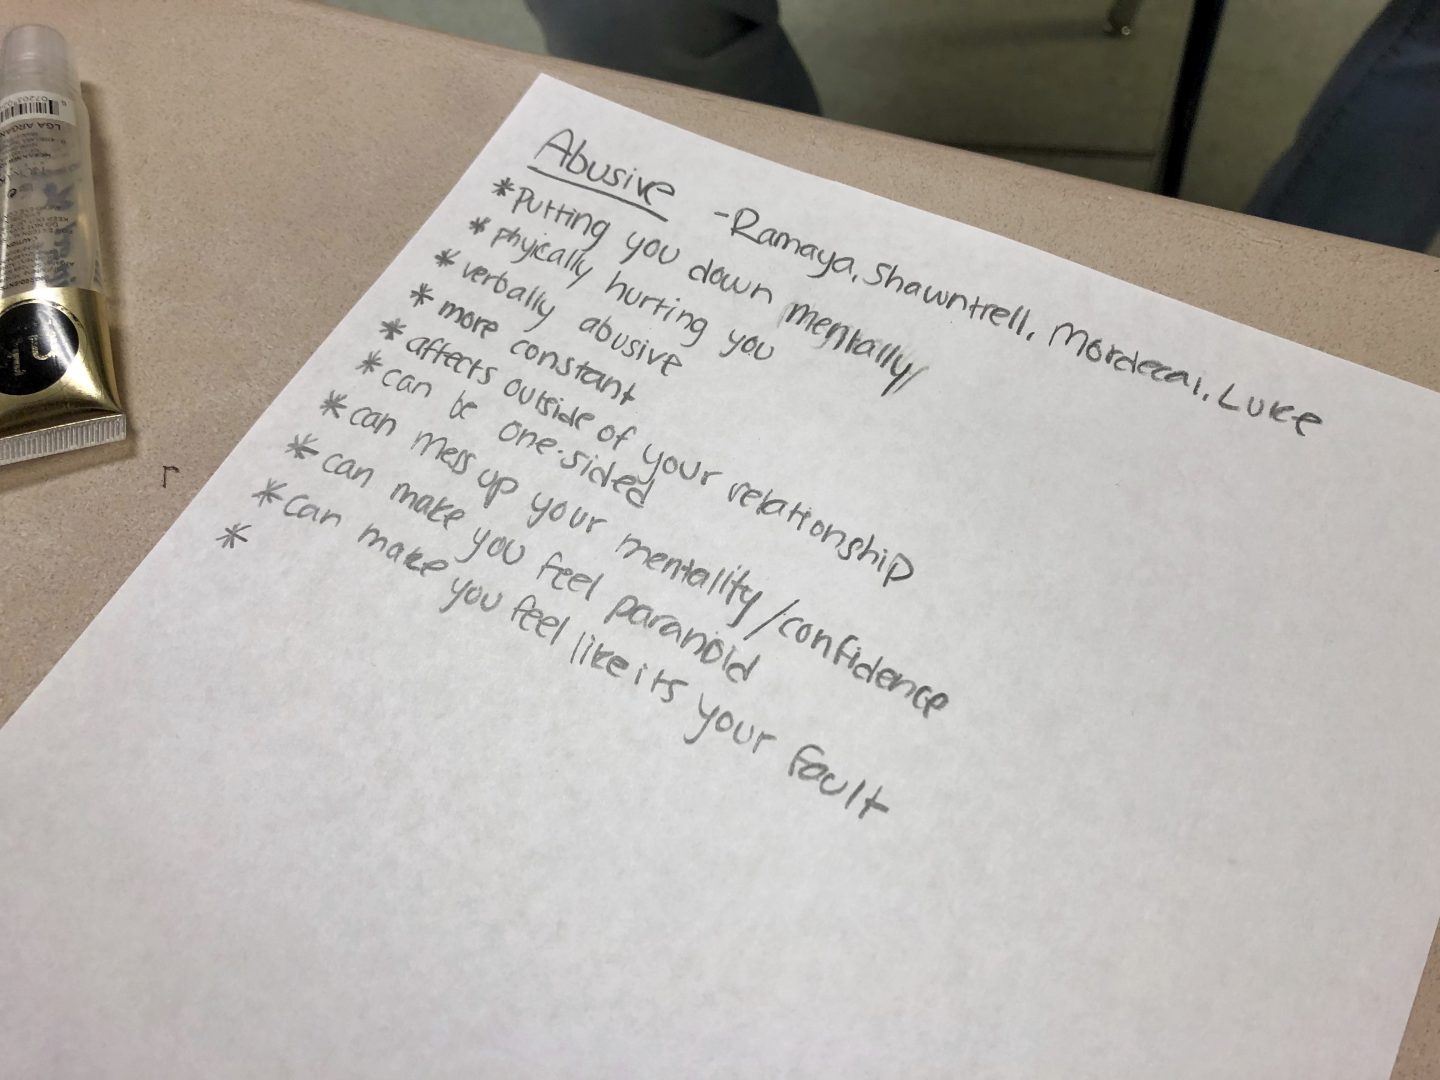 A list of the characteristics of an abusive relationship is made by students in small groups during a lesson by teachers from the nonprofit Raphael House, at Central Catholic High School in Portland, Ore., on April 15, 2019. “#MeToo has brought the issue of consent into the national spotlight, but it’s abundantly clear that people still struggle with the culture shift that’s happening,” said Jennifer Driver, state policy director of the Sexuality Information and Education Council of the United States, which favors liberal sex ed policies. 